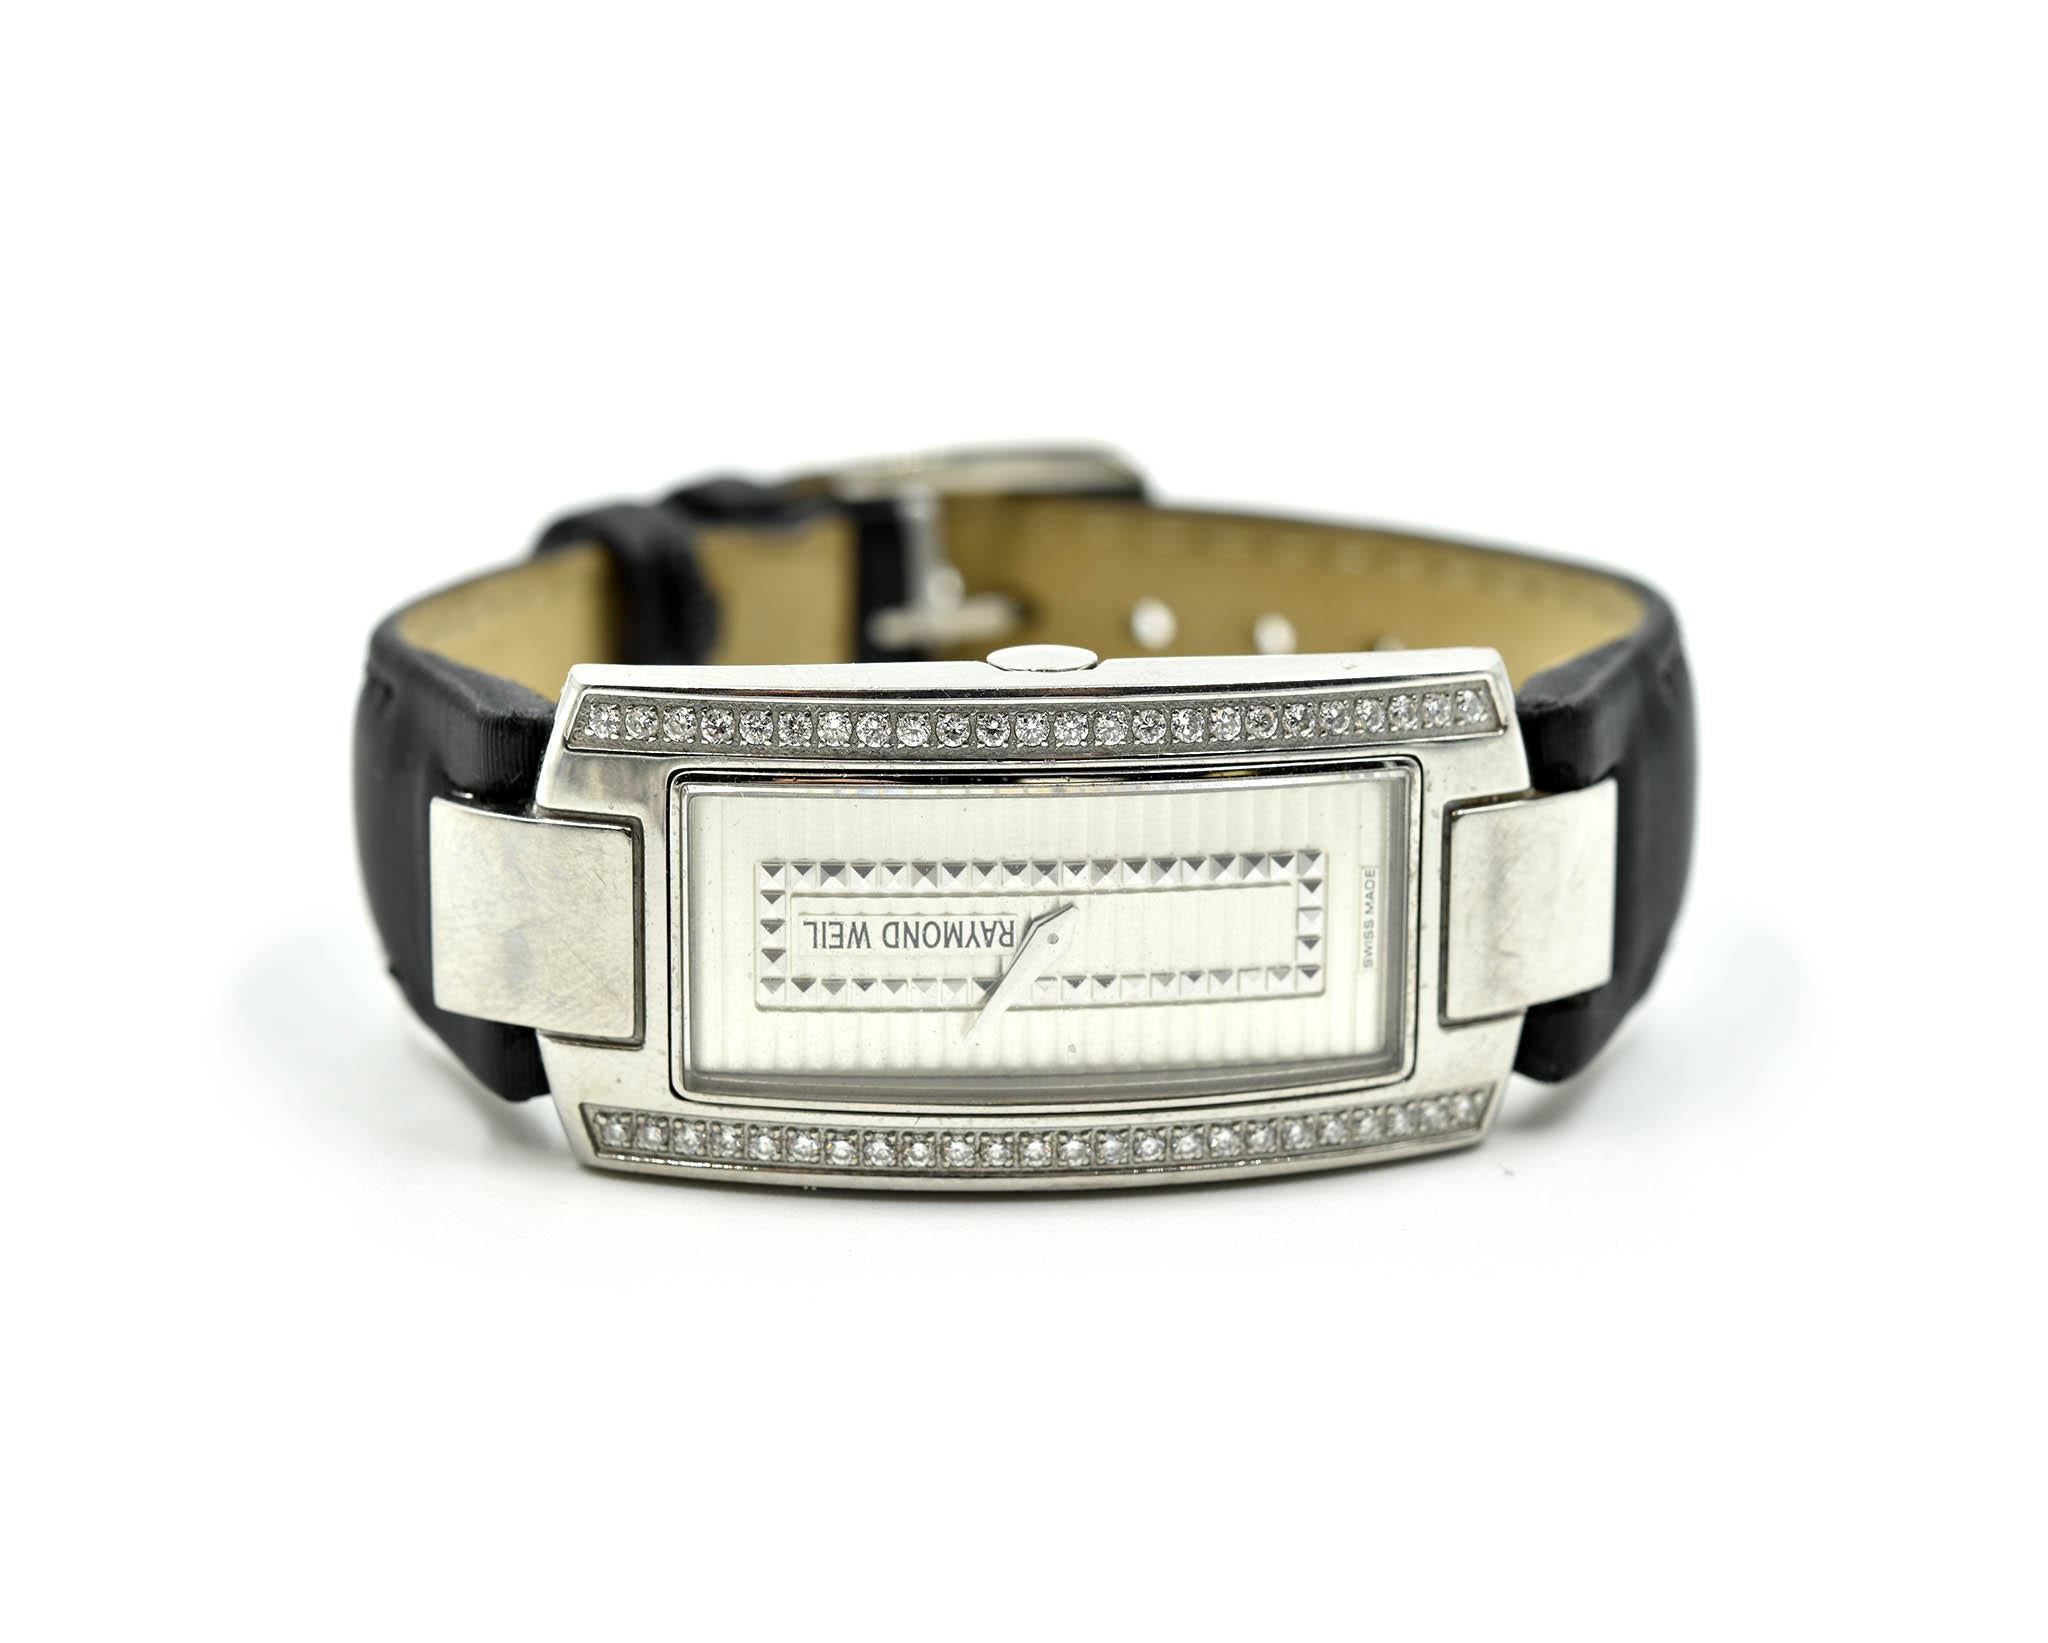 Movement: quartz
Function: hours, minutes
Case: 19x36mm stainless steel case, sapphire crystal, diamonds
Band: black leather strap with steel buckle, fits up to a 6.5-inch wrist
Dial: textured silvered dial, silver hands
Serial #: V446028
Reference